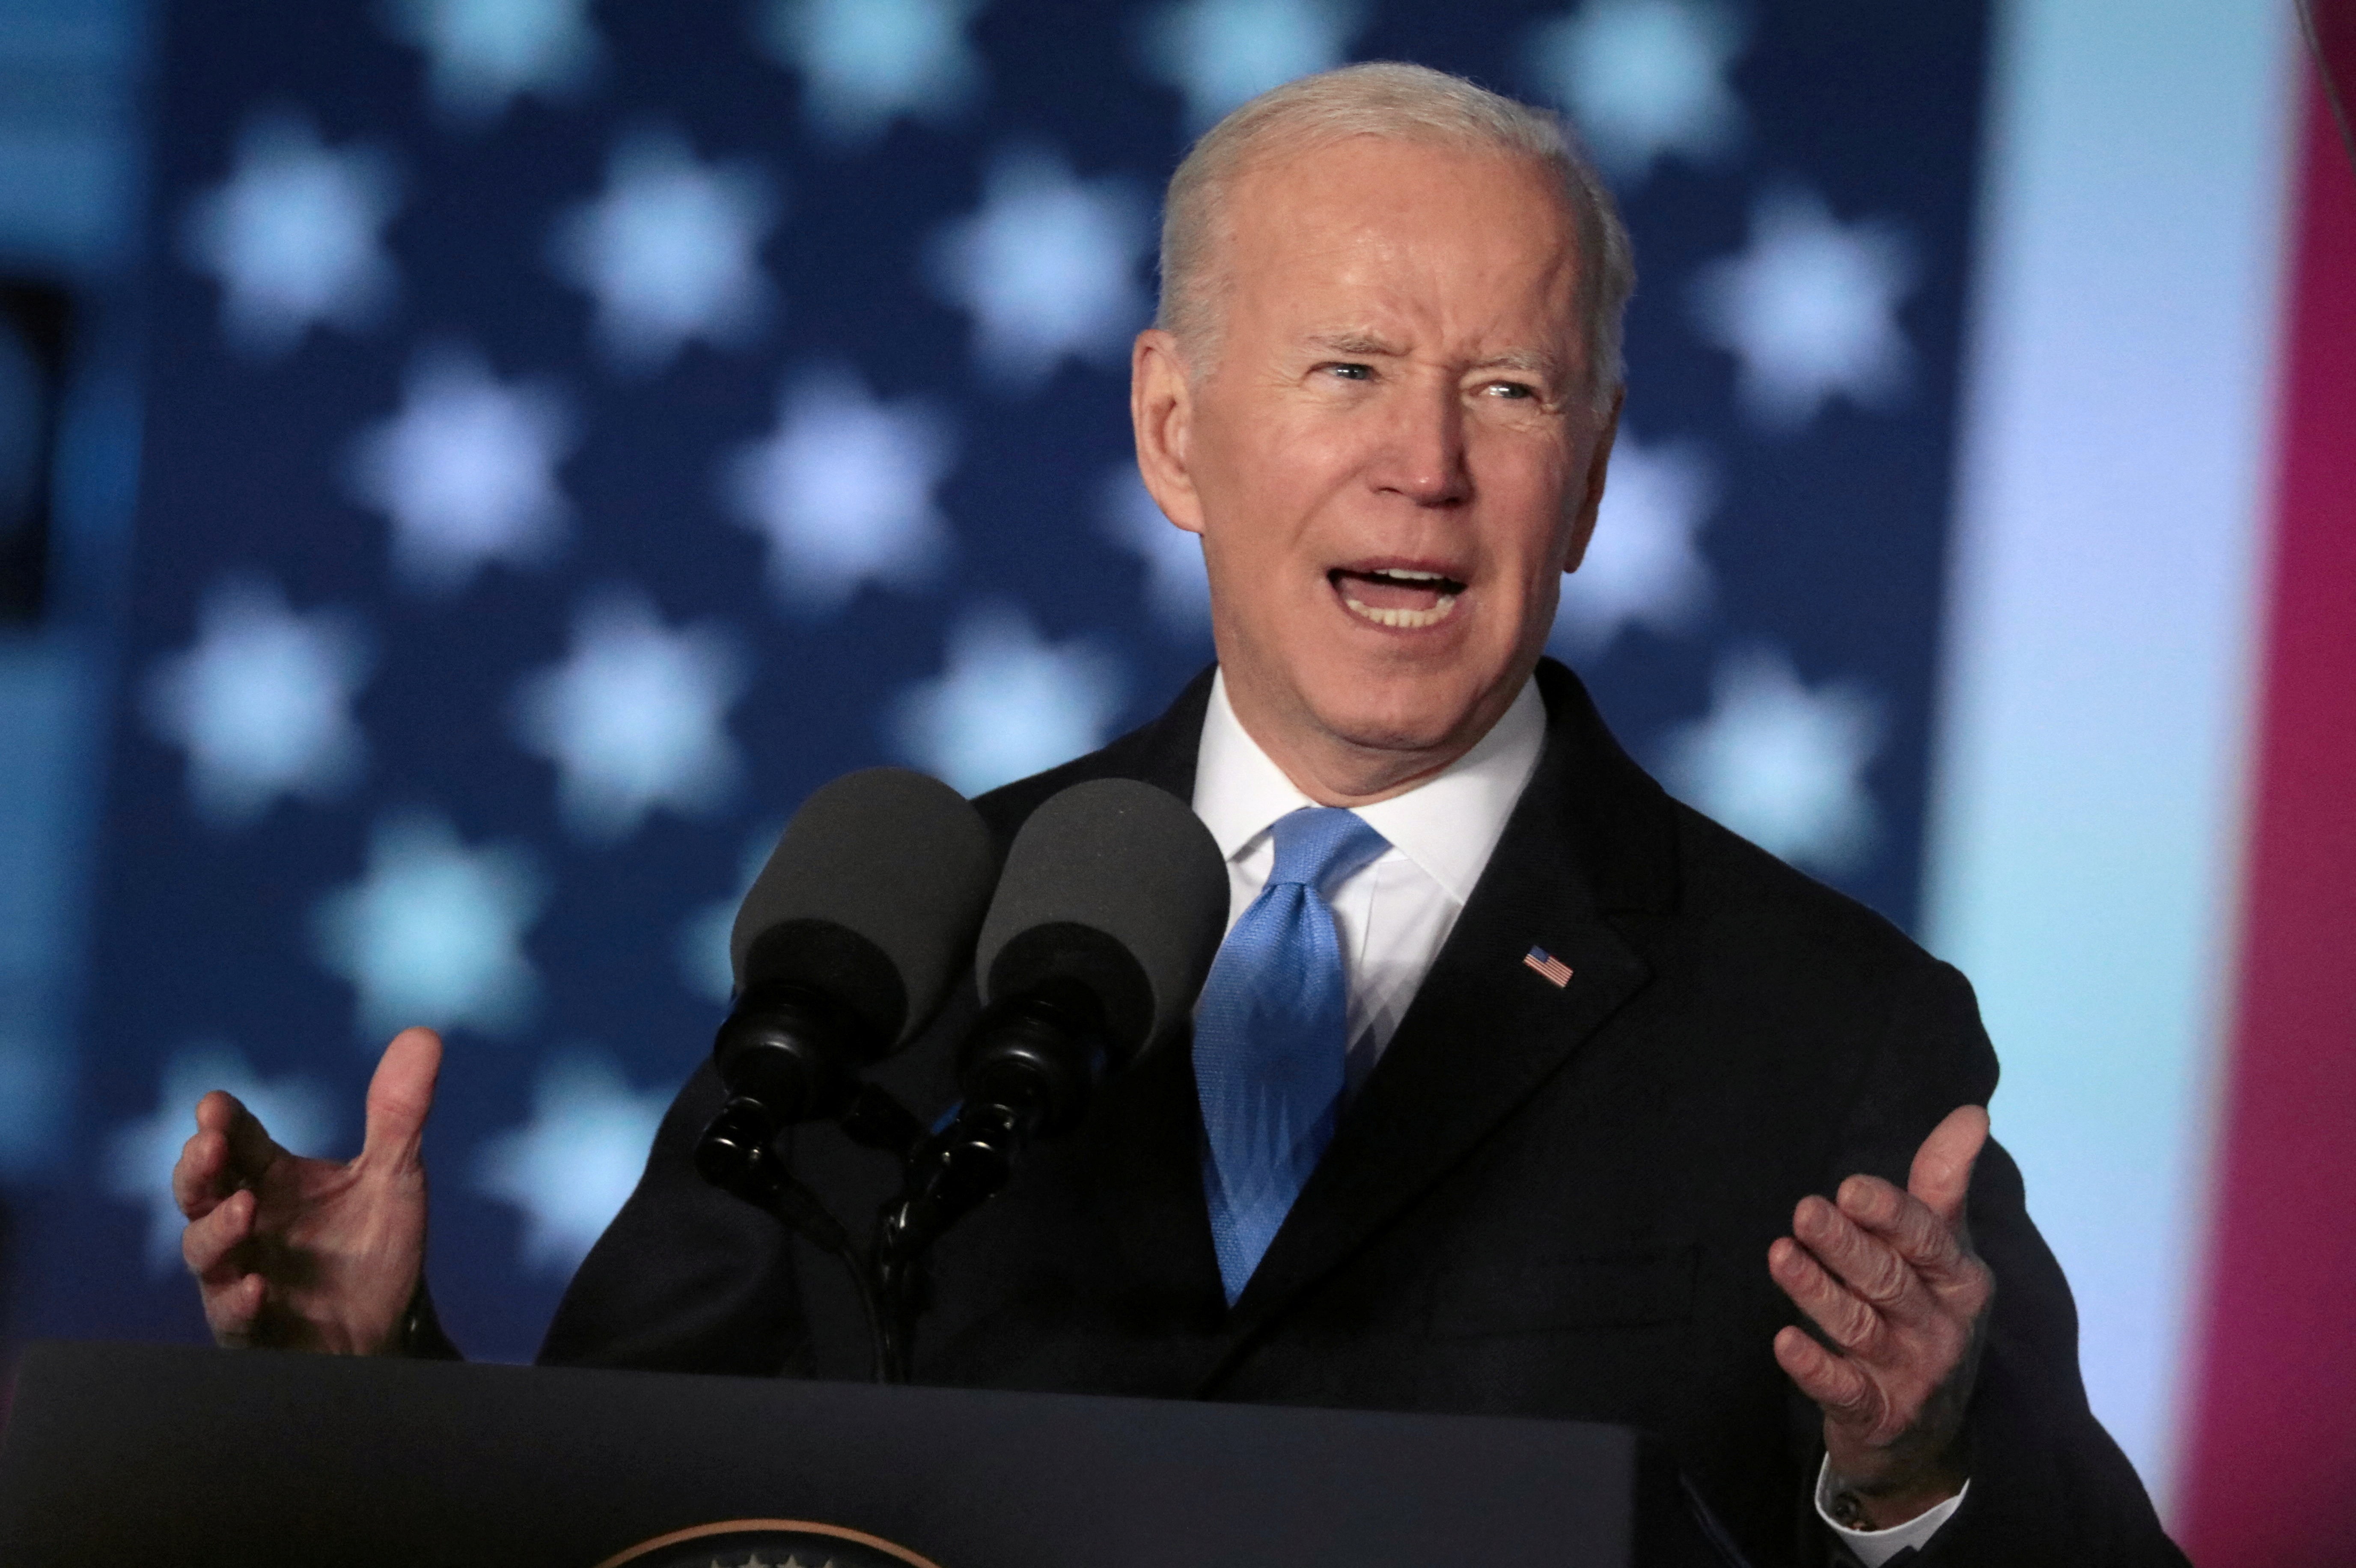 Biden’s alarming Ukraine gaffes beg the question: Who is running our country?